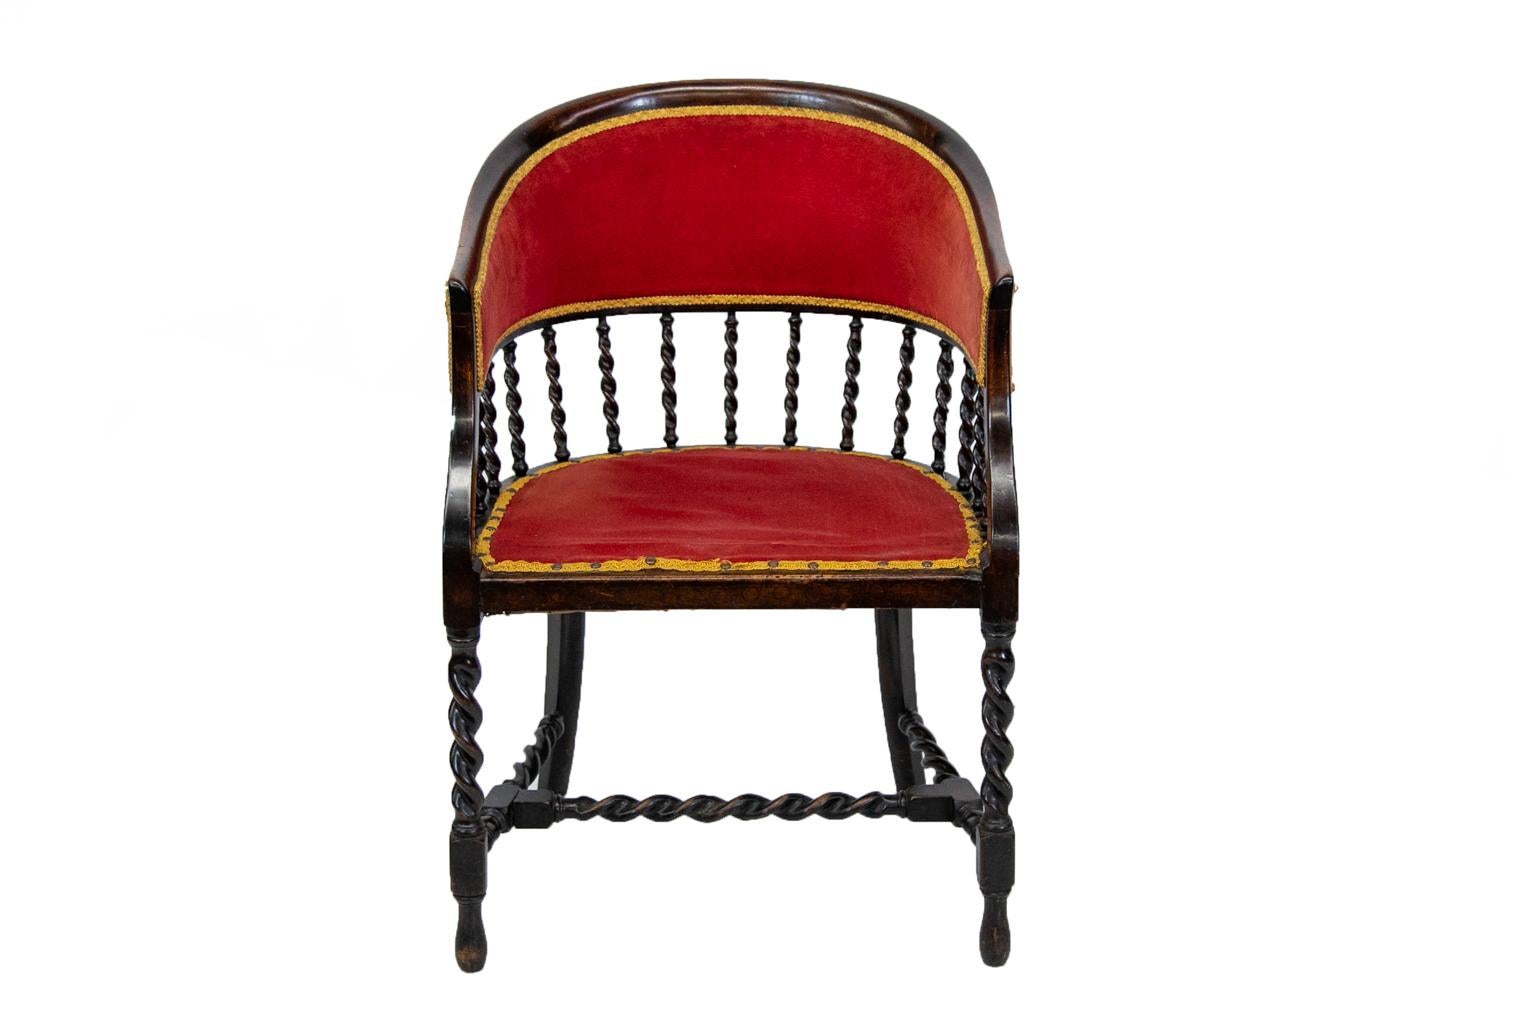 English Barley Twist barrel back armchair, with the back supported by fifteen barley twist spindles. The legs and cross stretchers also have barley twist turnings.